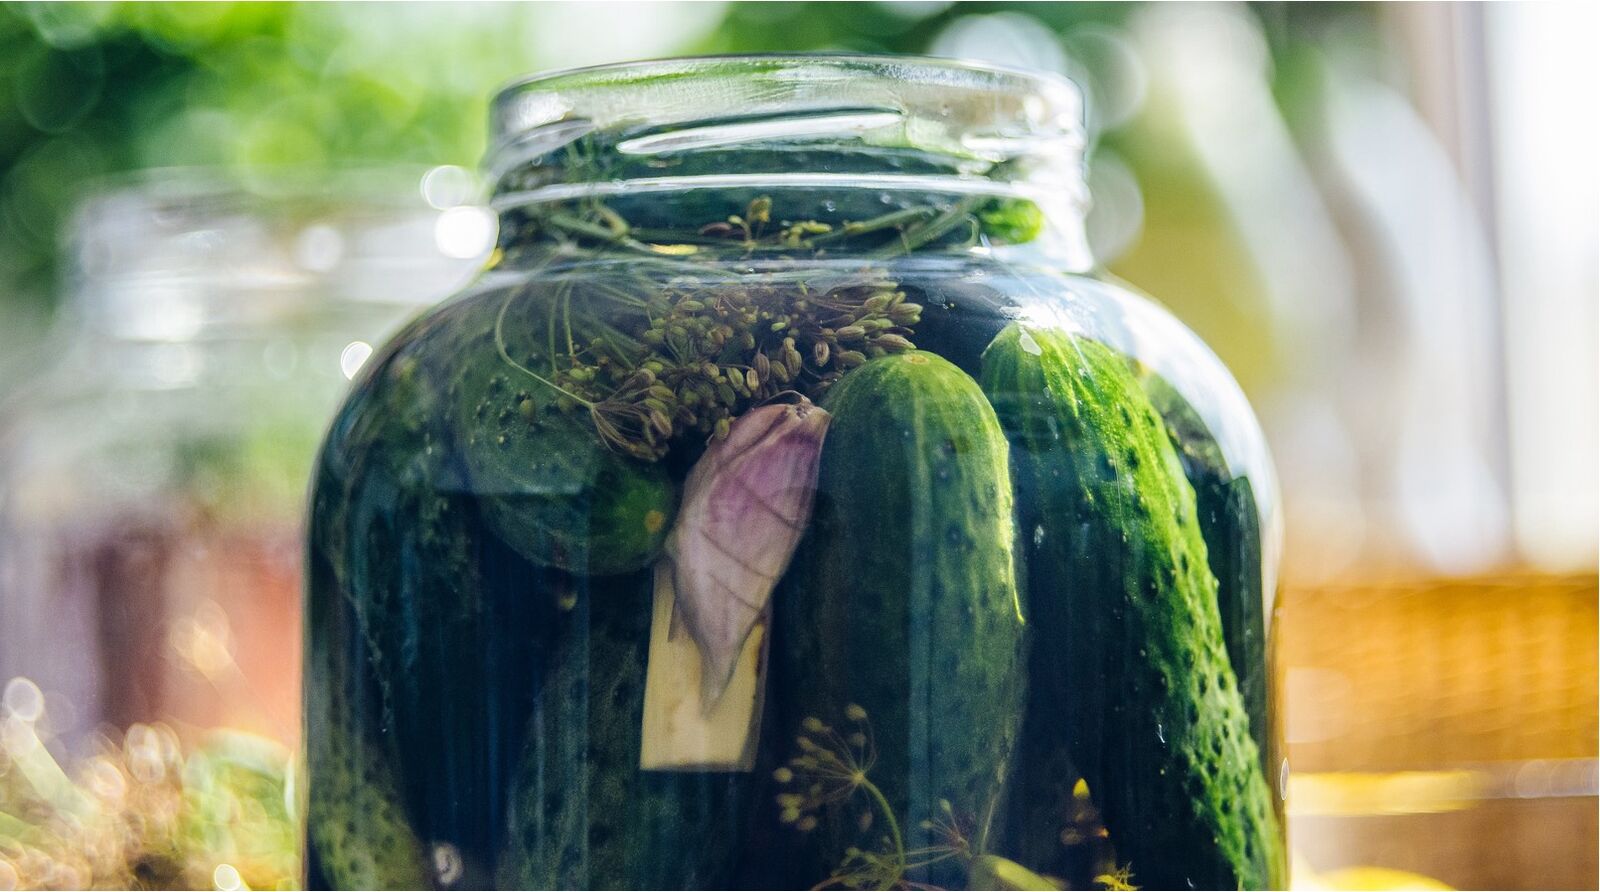 Make your own pickled cucumbers